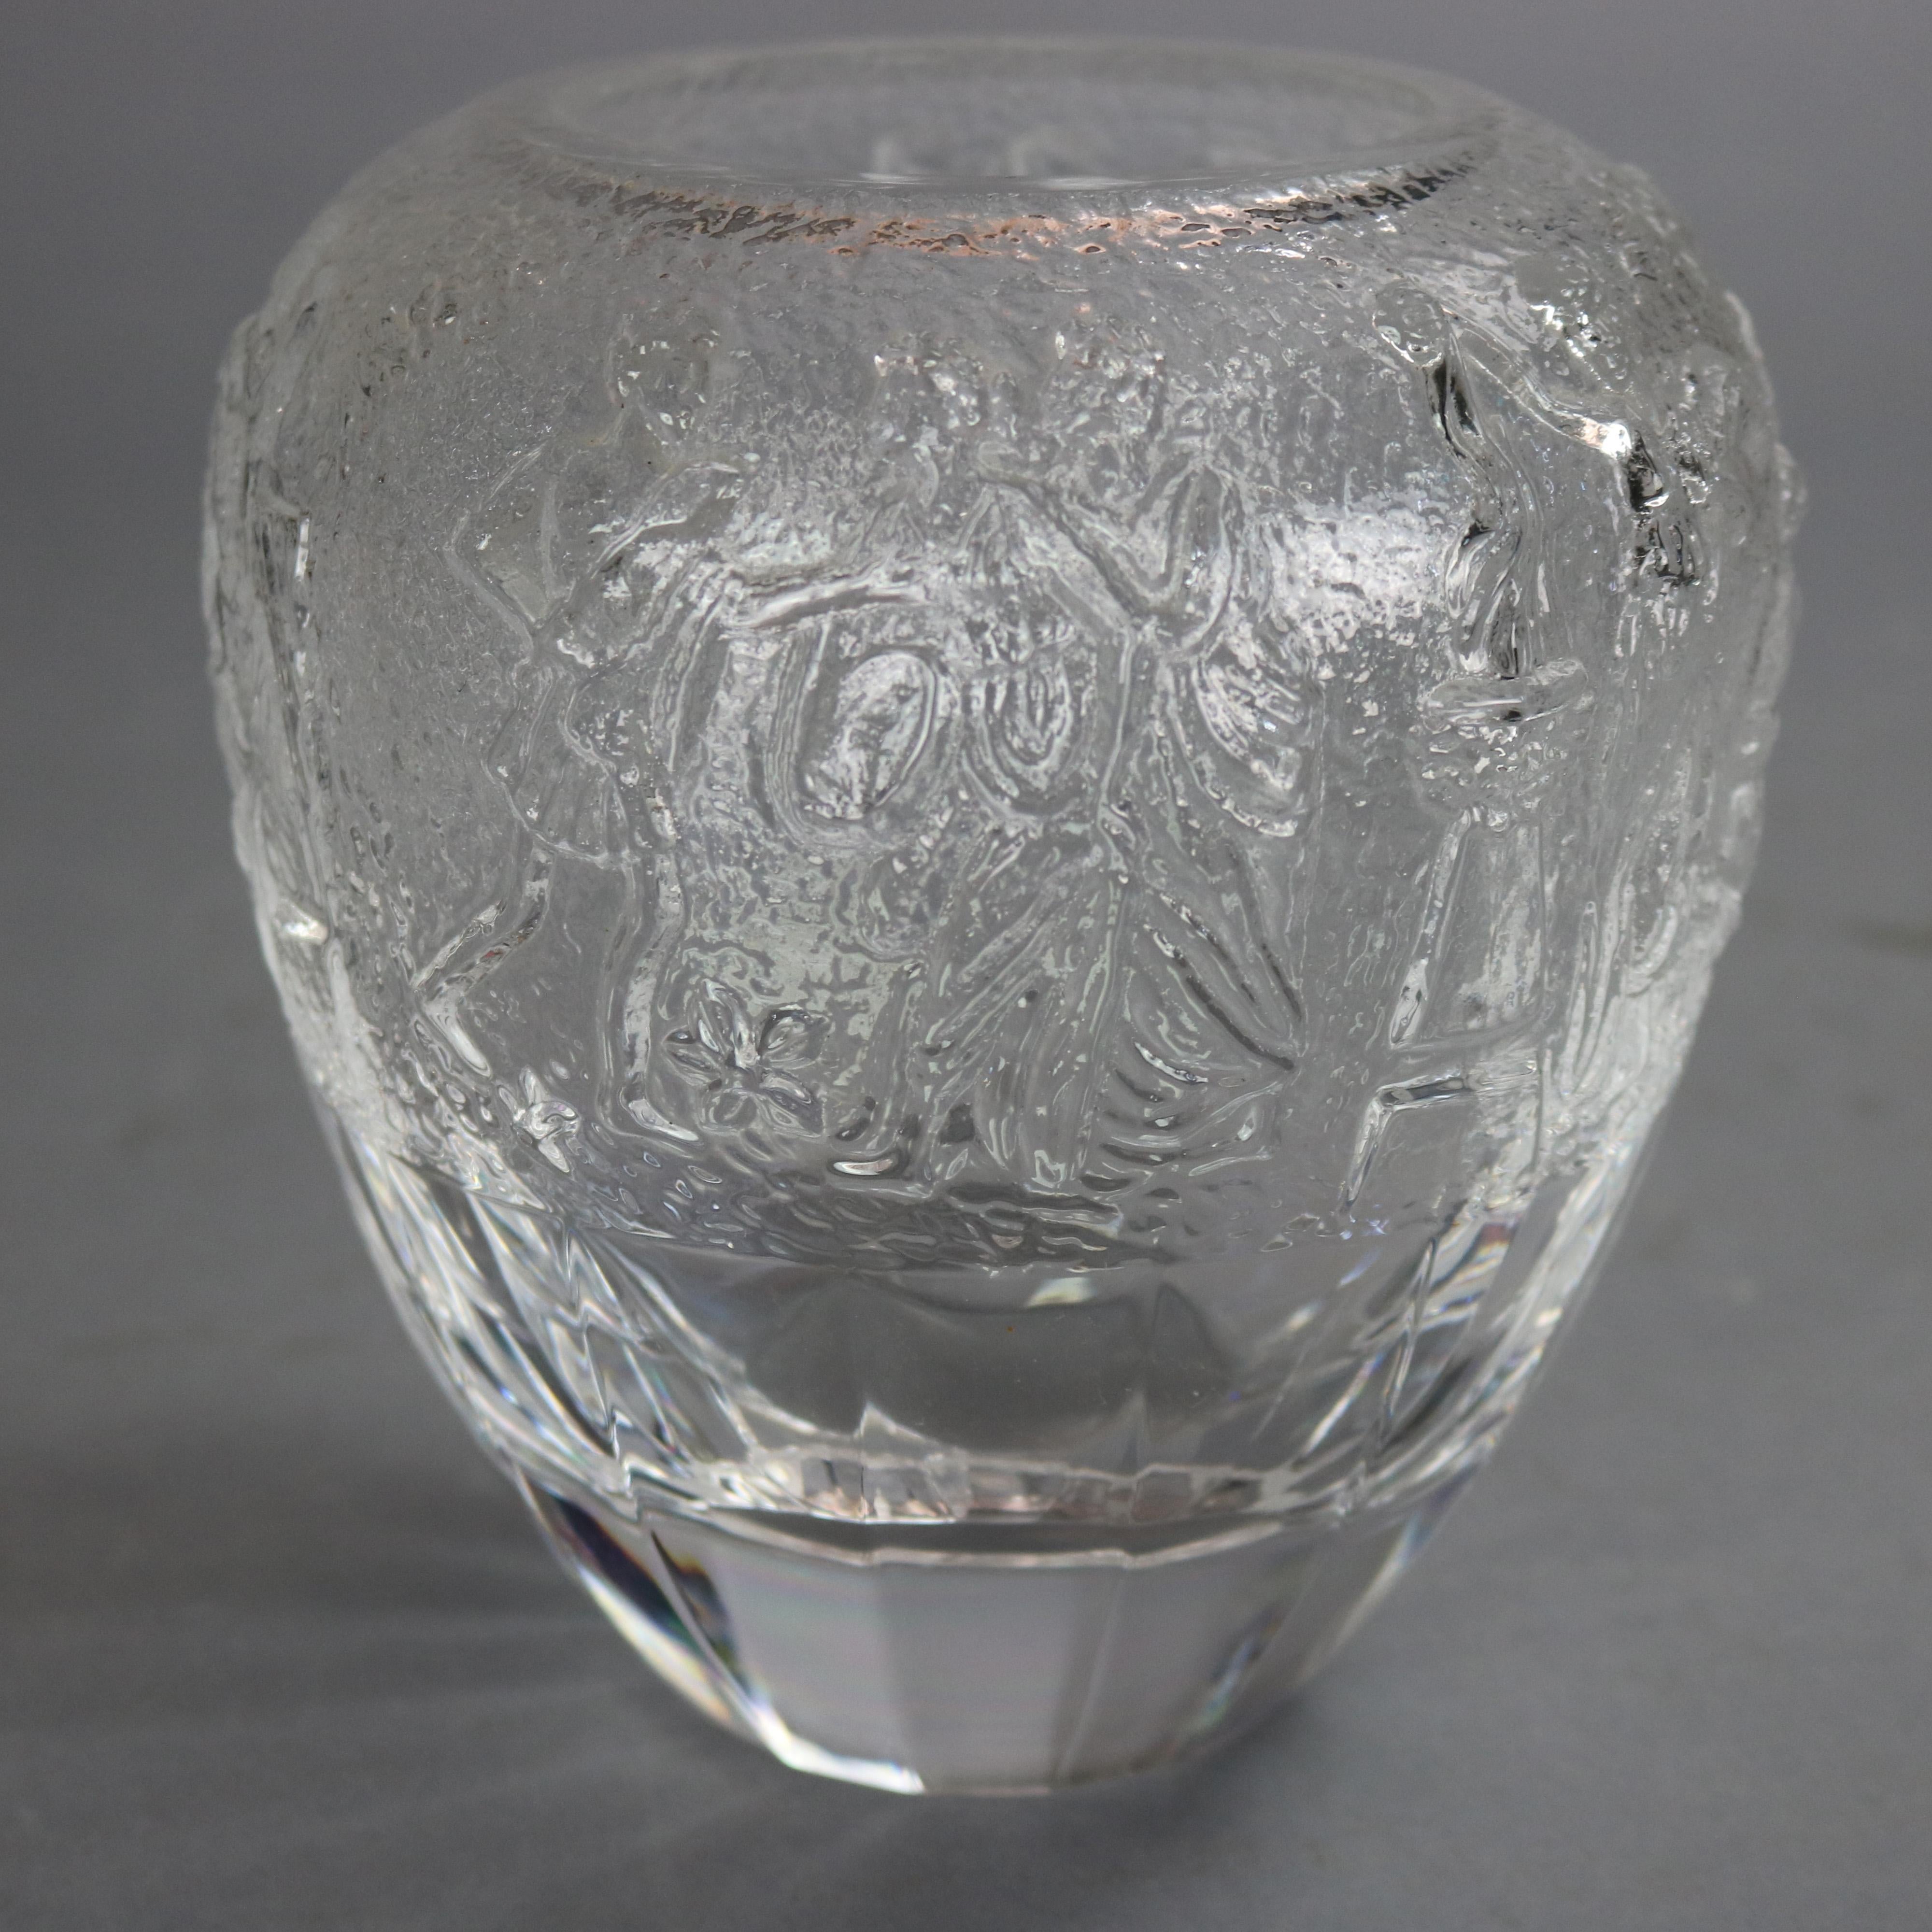 20th Century Vintage High Relief Glass Vase with Figures and Garden Elements, circa 1950